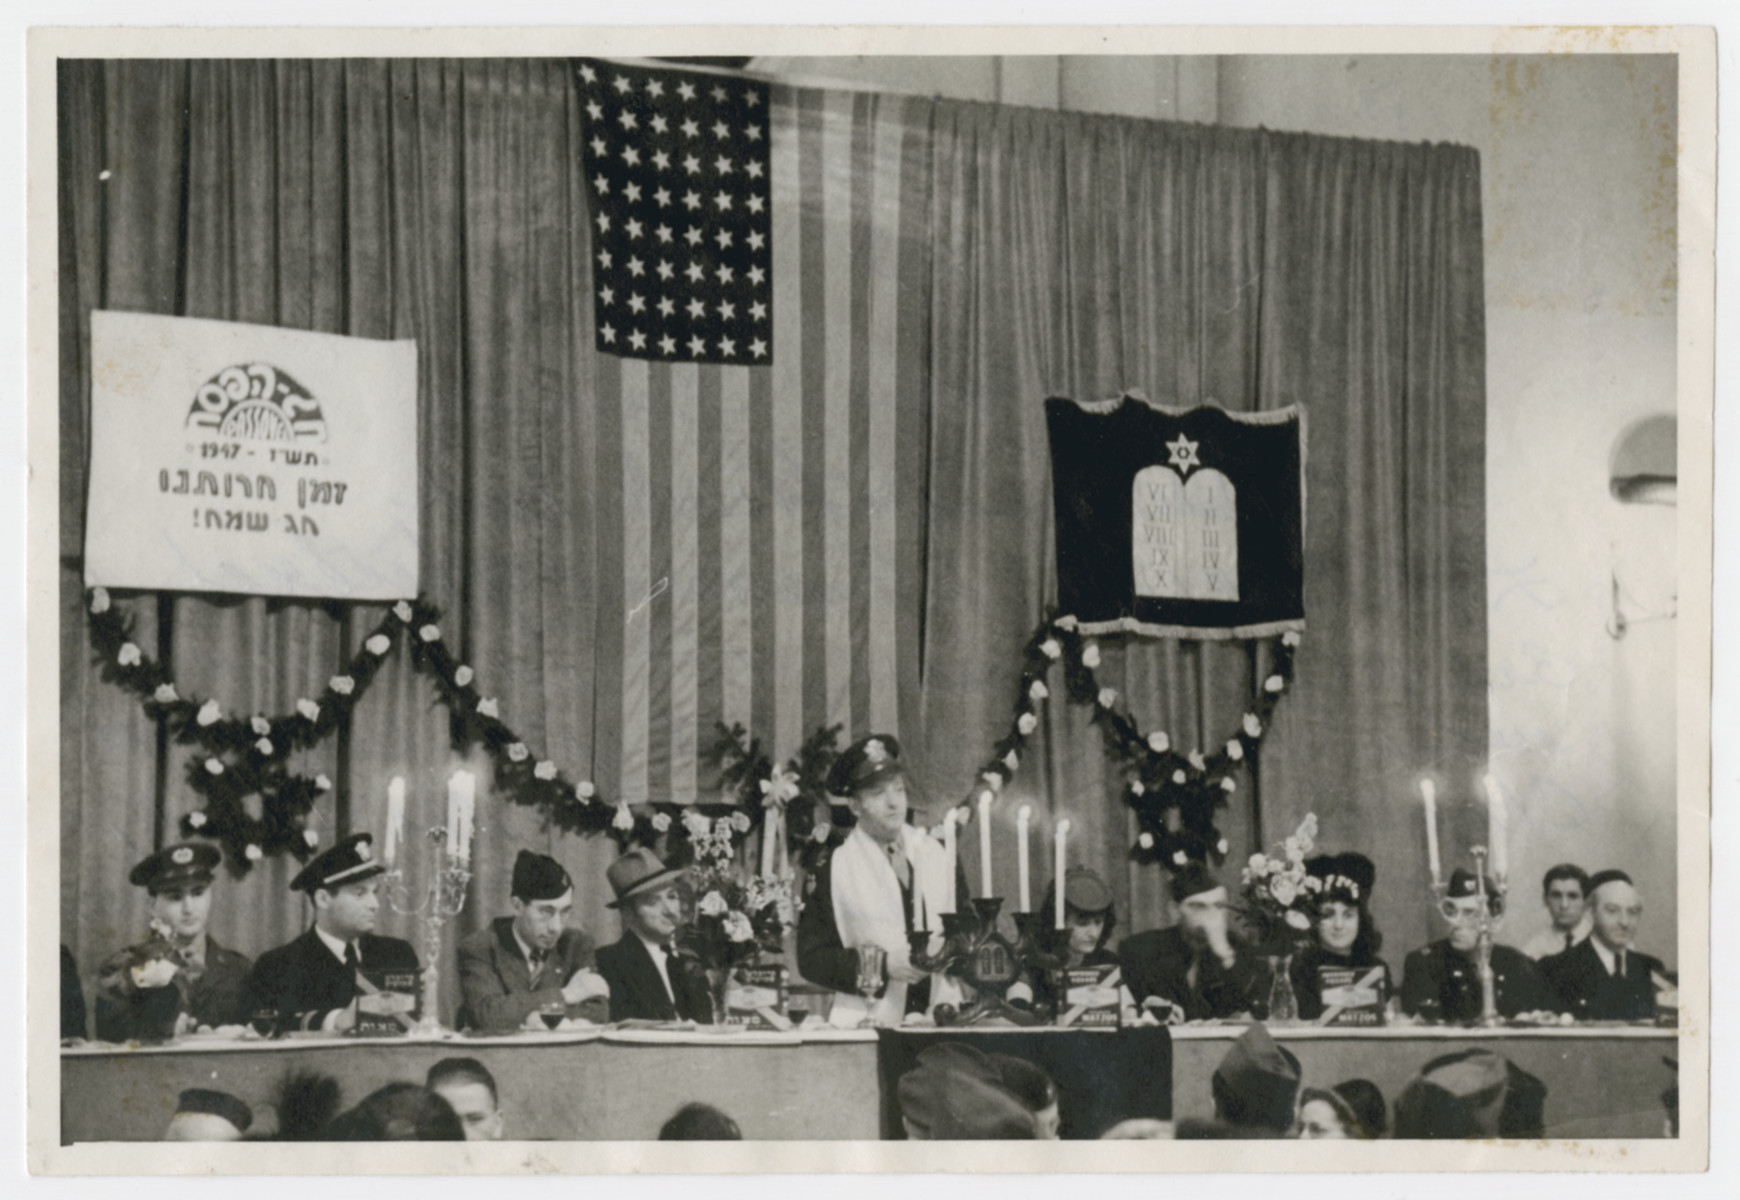 Rabbi William Dalin conducts Passover services in the newly rededicated synagogue in Wiesbaden.

Left to right: two American officers, 3rd person unknown, Dr. Frum who was a DP and president of the Congregation Chapter, Rabbi William Dalin, , Bella Dalin. unknown, Lorna Adelman, Gil Adelman, unknown.